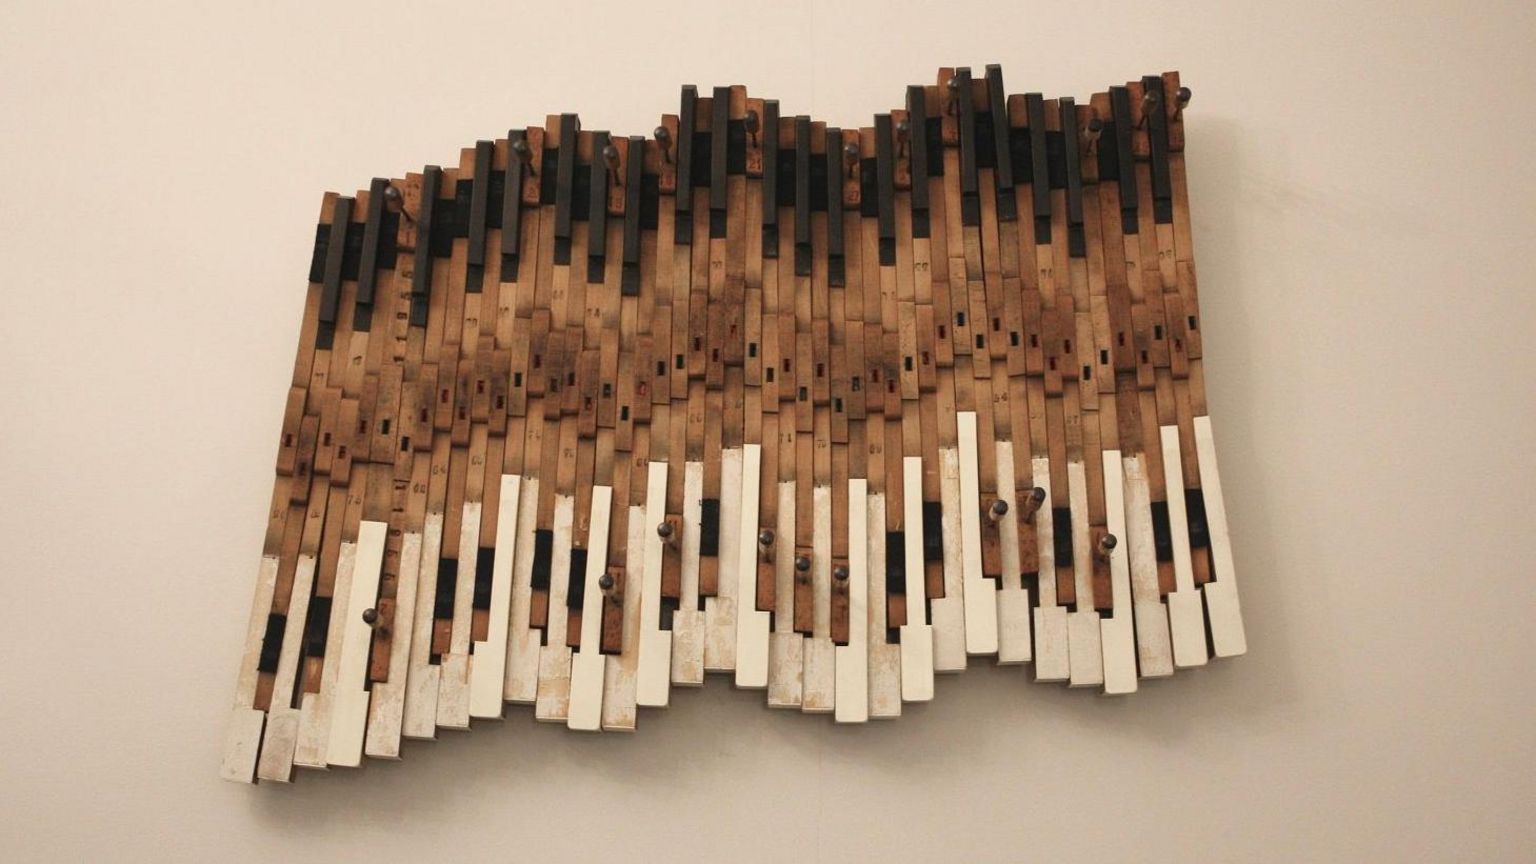 A piece of colourful wall art made using piano keys